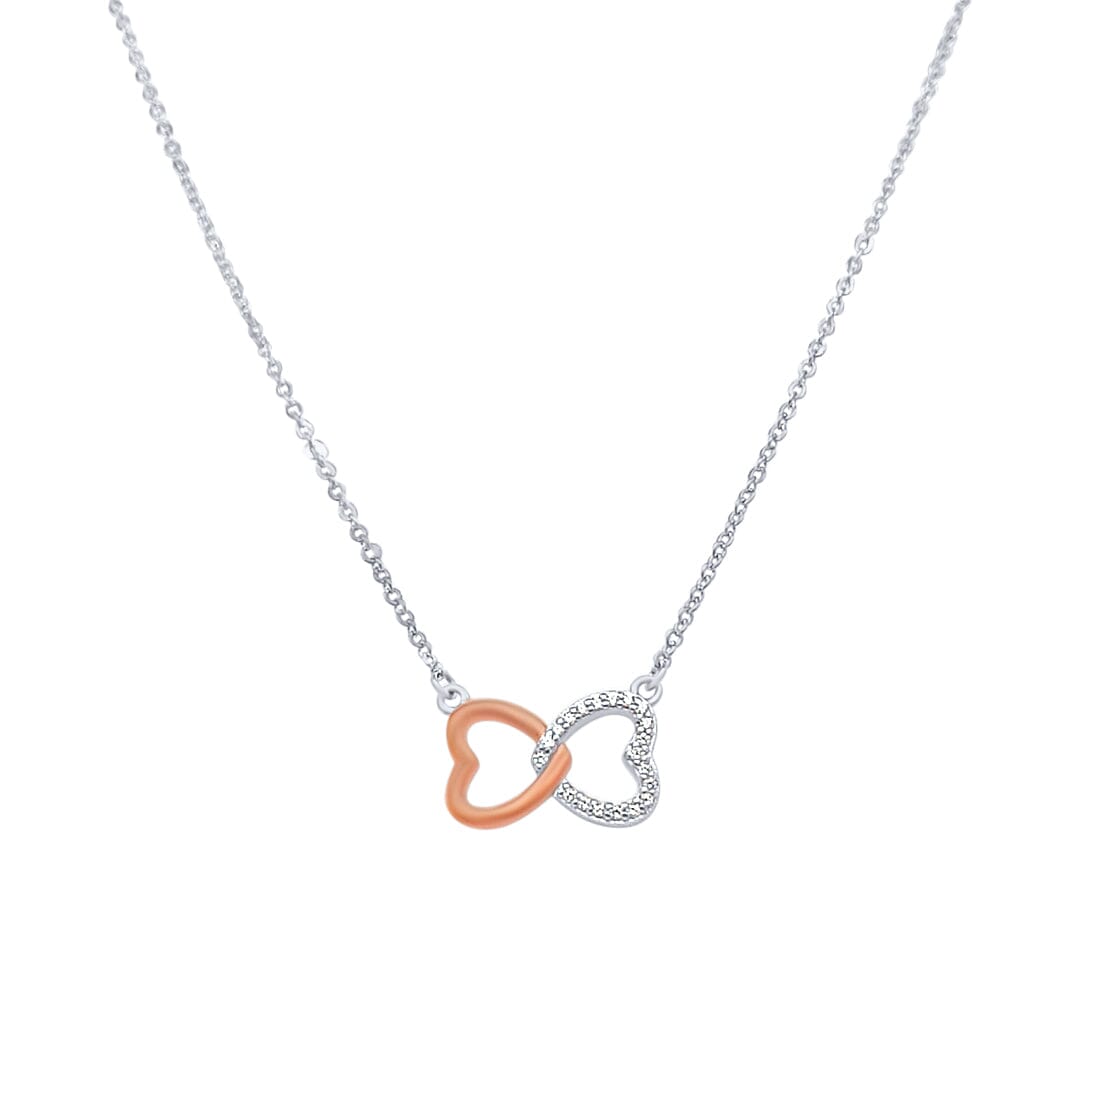 45cm Heart and Rose Necklace with Cubic Zirconia in Sterling Silver Necklaces Bevilles 